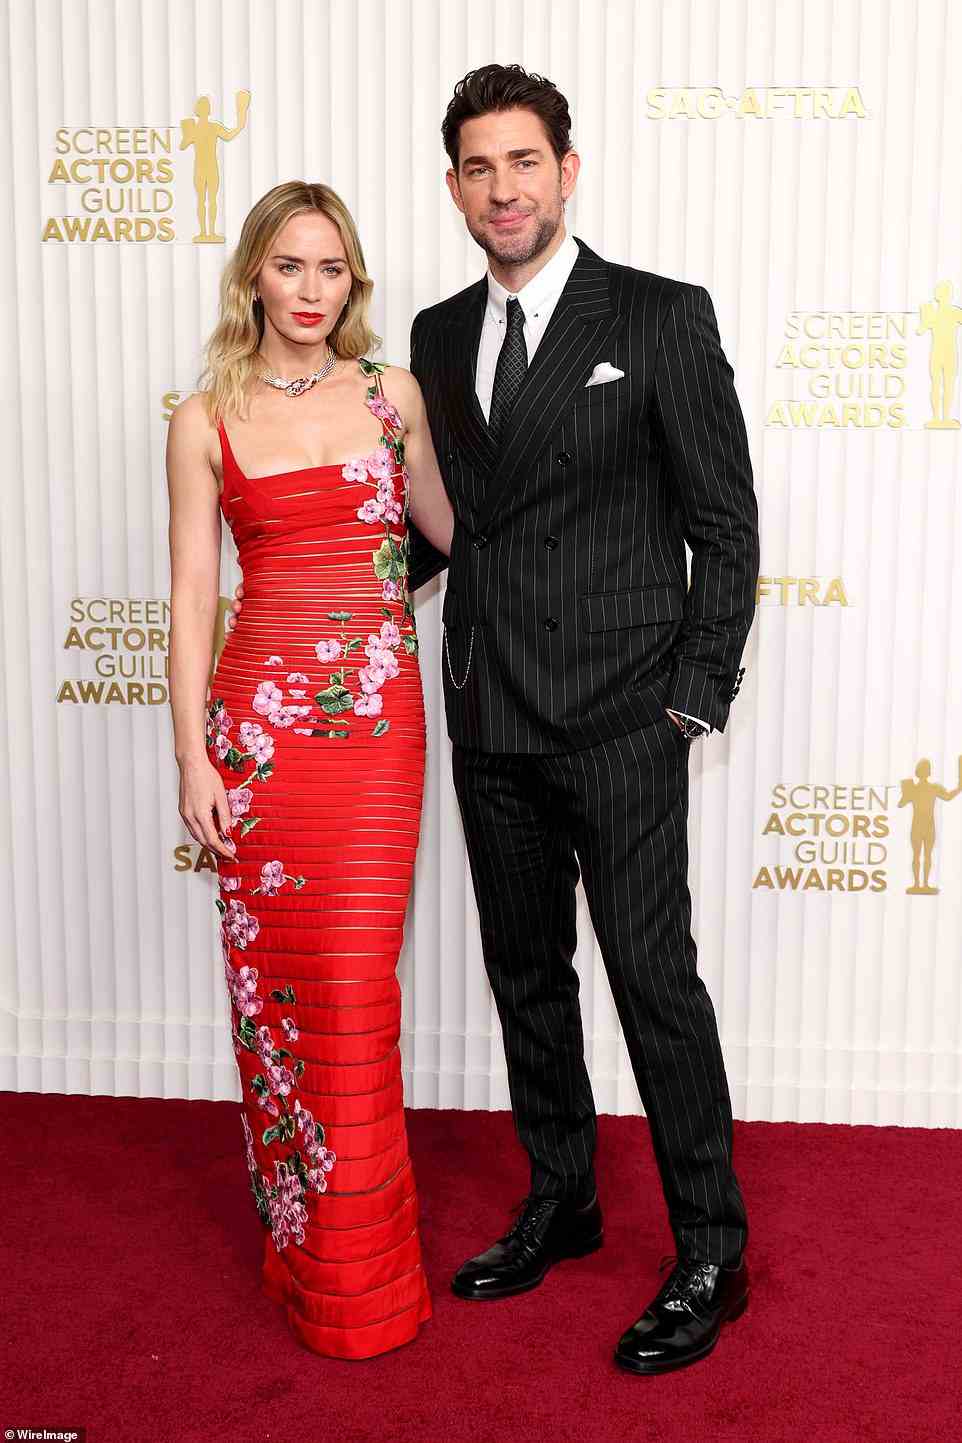 Good looking couple: Emily Blune seen with her husband John Krasinski, who looked dapper in a pinstripe suit